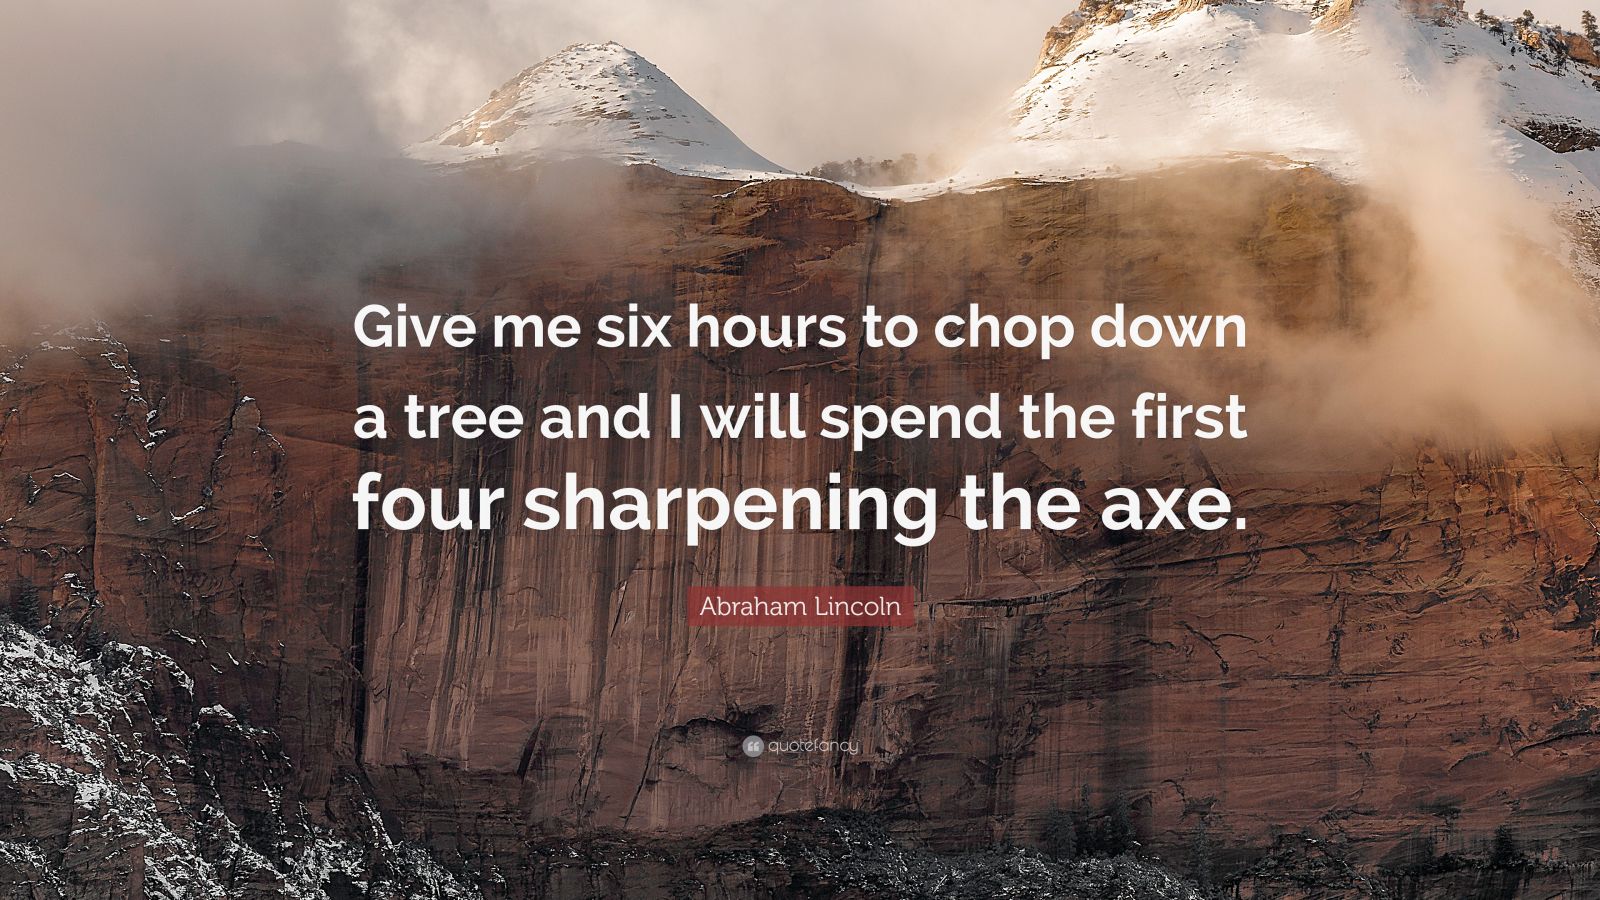 Abraham Lincoln Quote: “Give me six hours to chop down a tree and I